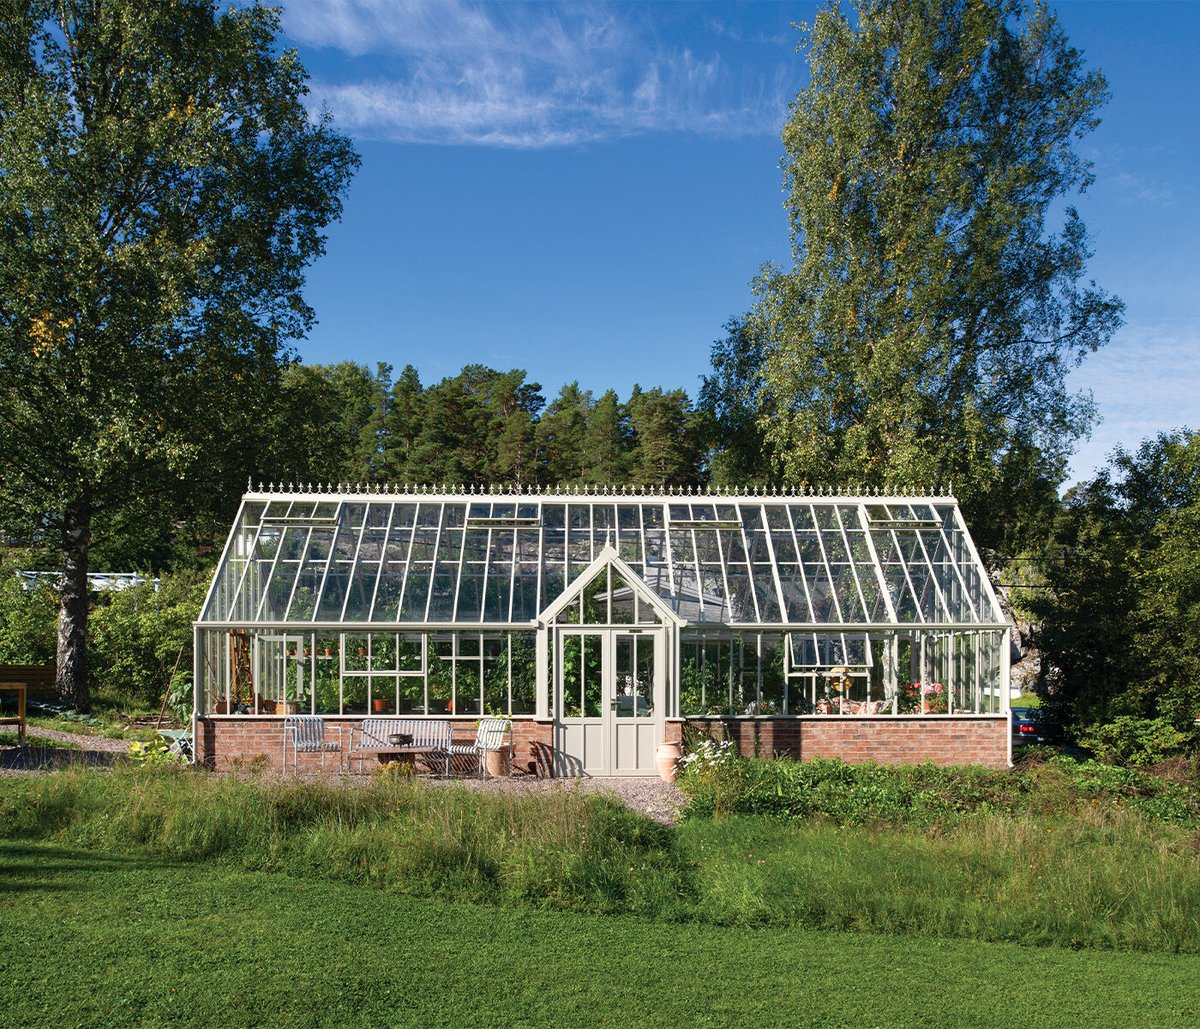 Building Award Winning Greenhouses and Glasshouses since 1938. Discover our range of Victorian Glasshouses: bit.ly/3Occly3 Victorian Grand Manor in Sweden.